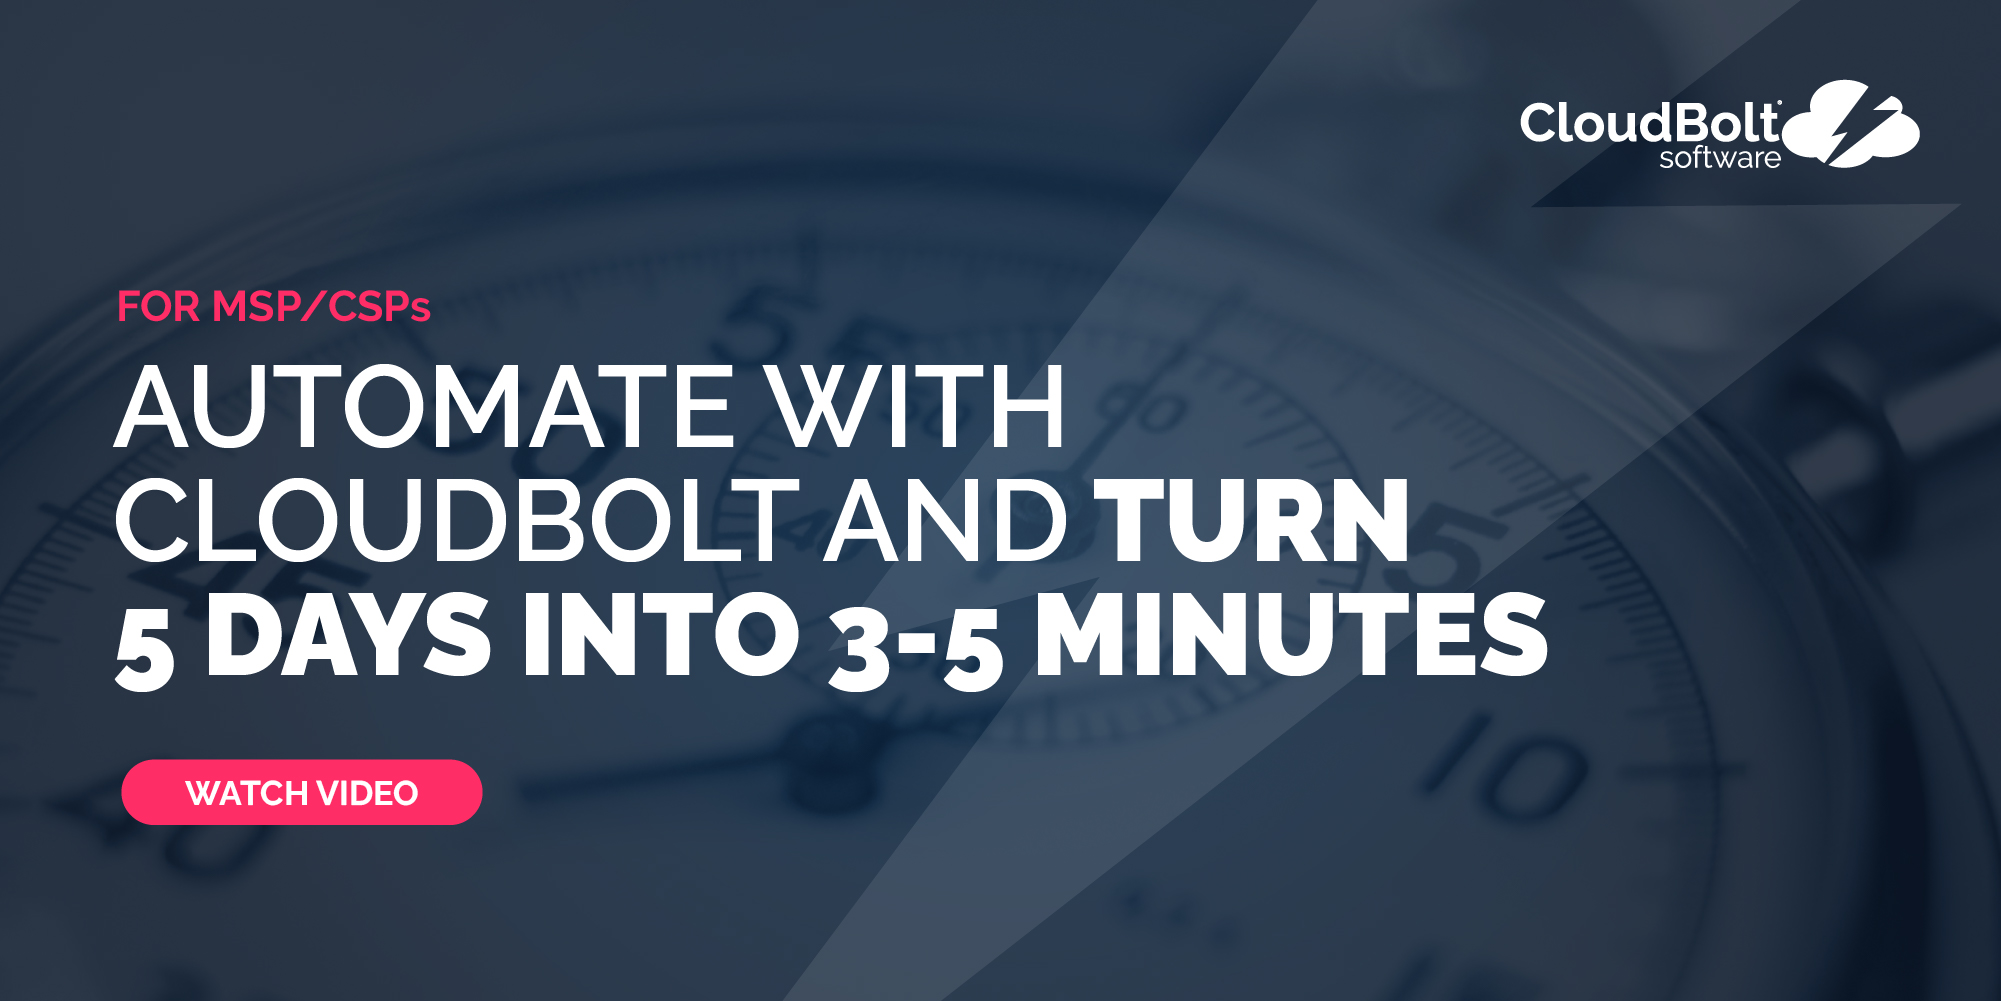 Automate with CloudBolt and Turn 5 Days into 3-5 Minutes